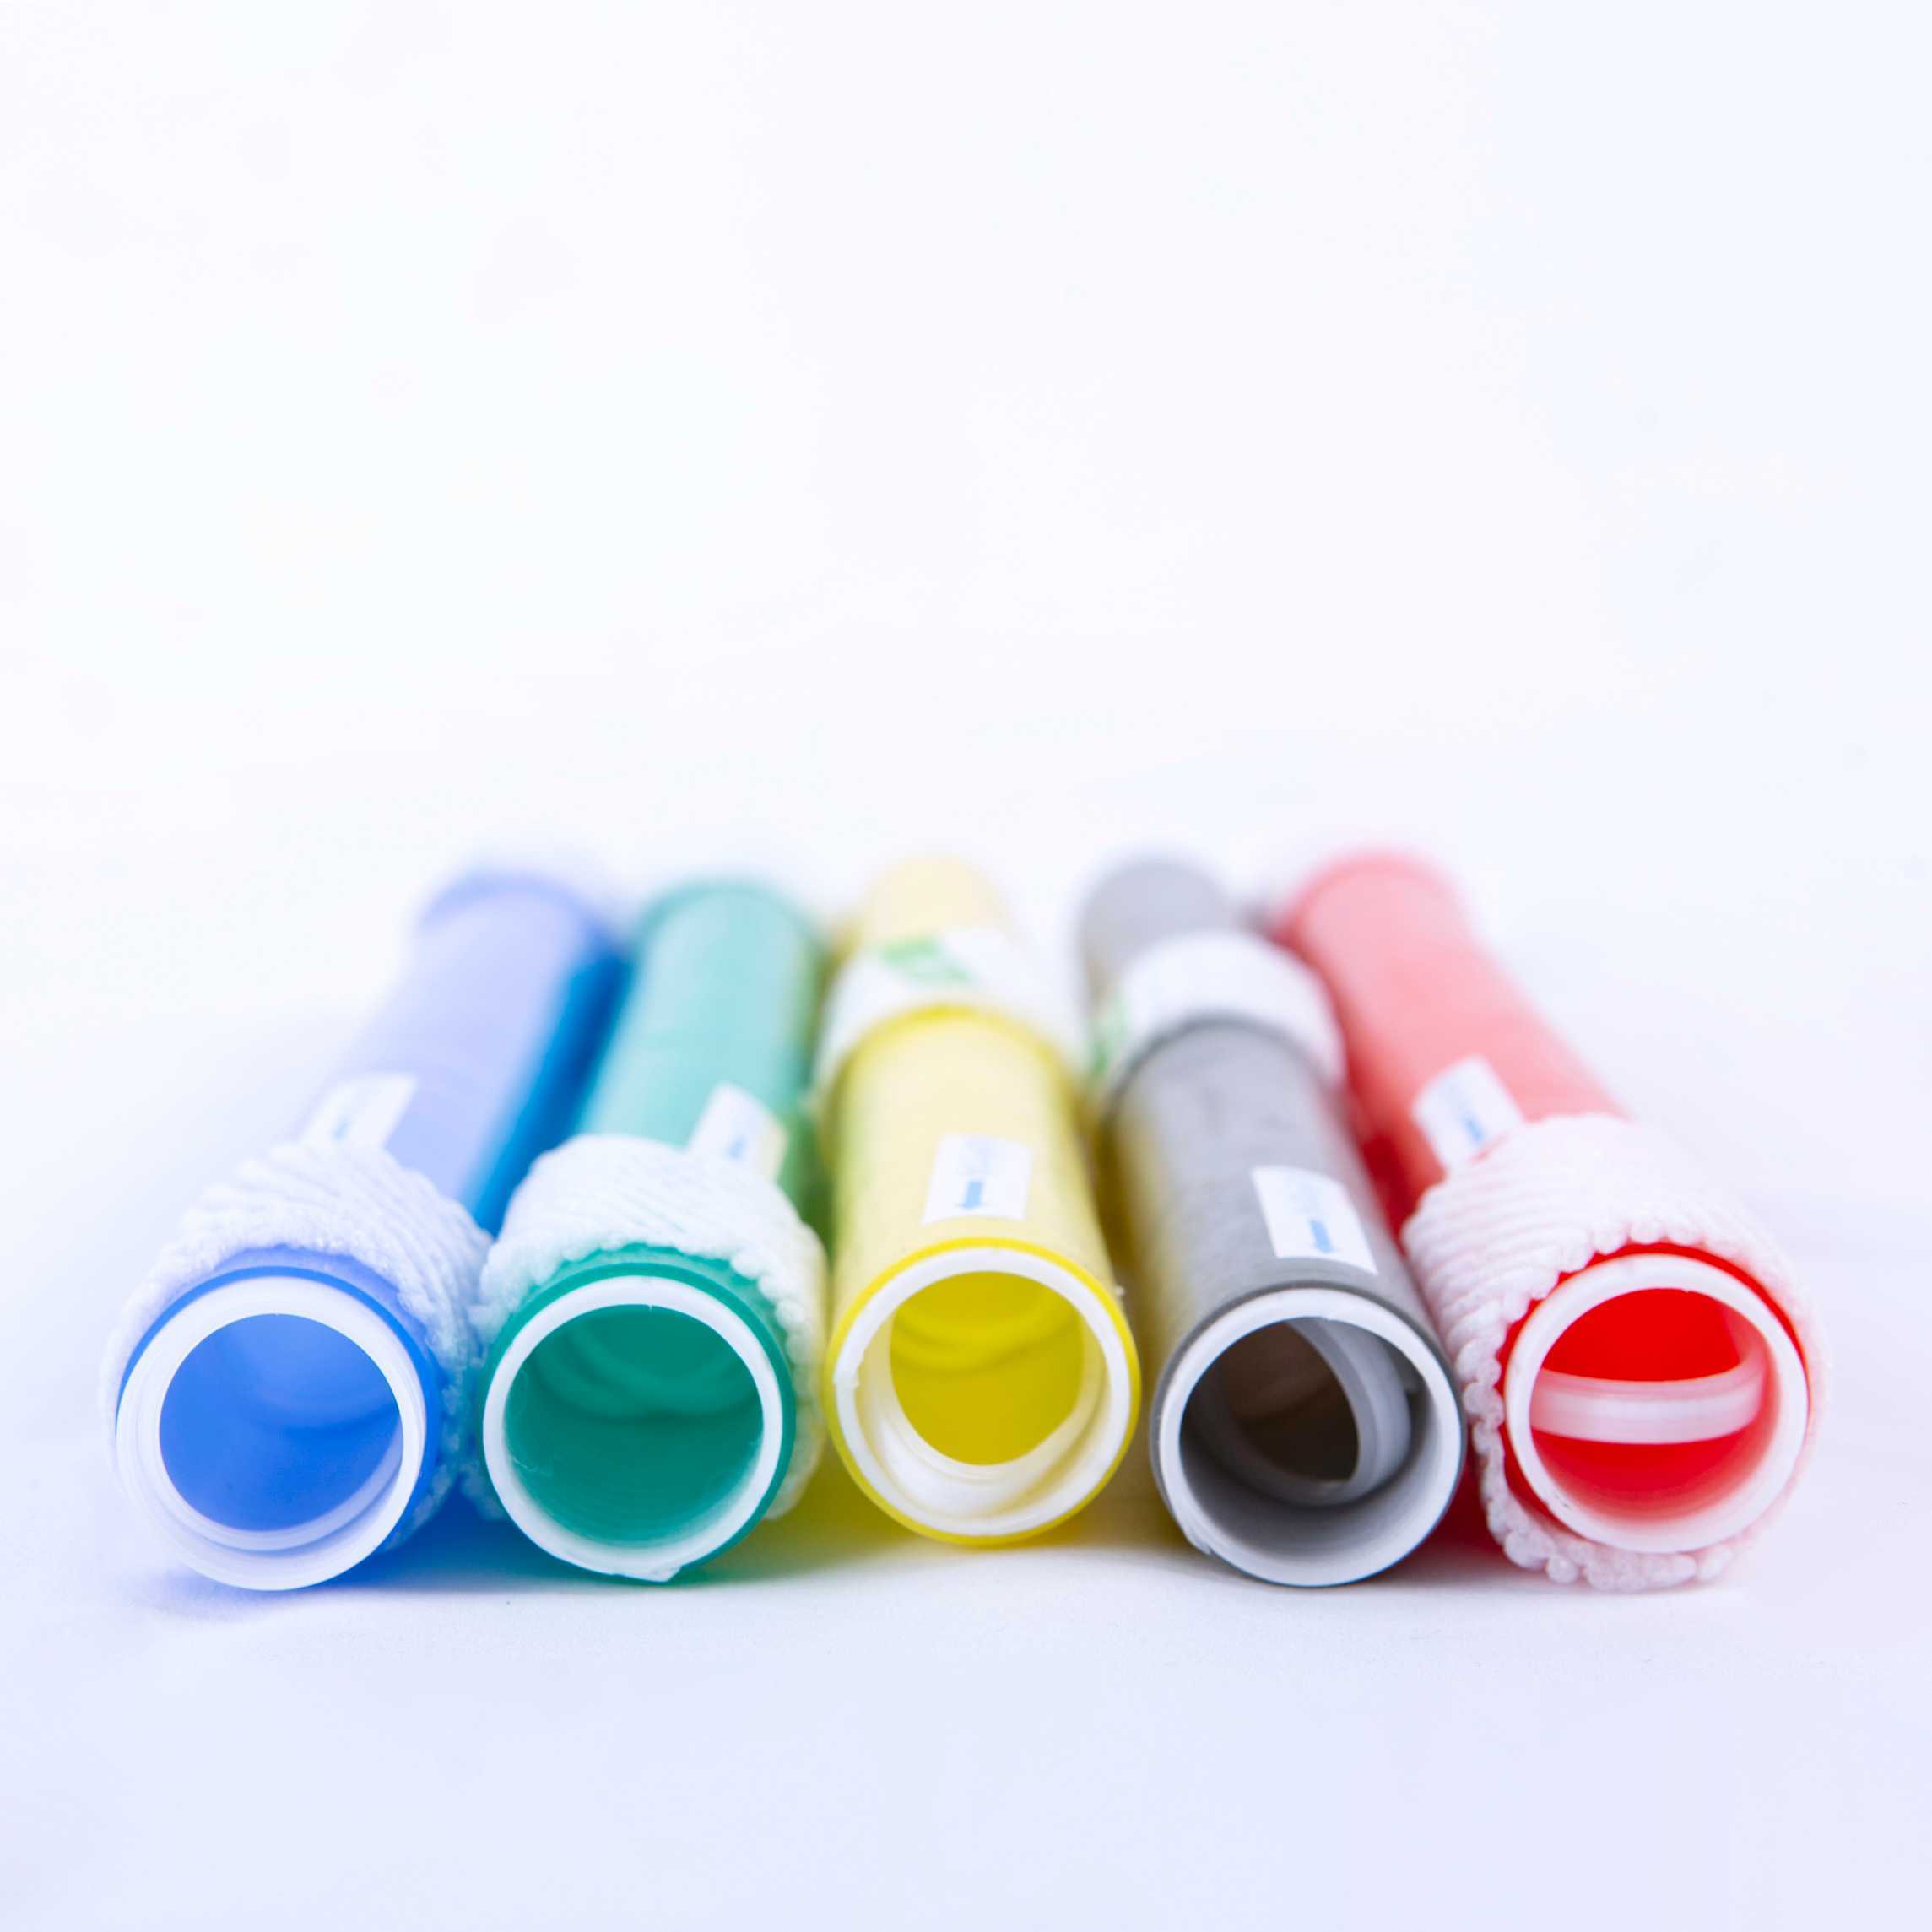 Szfb Silicone Rubber Cold Shrink Tube Soft Silicone Tubing for Protection